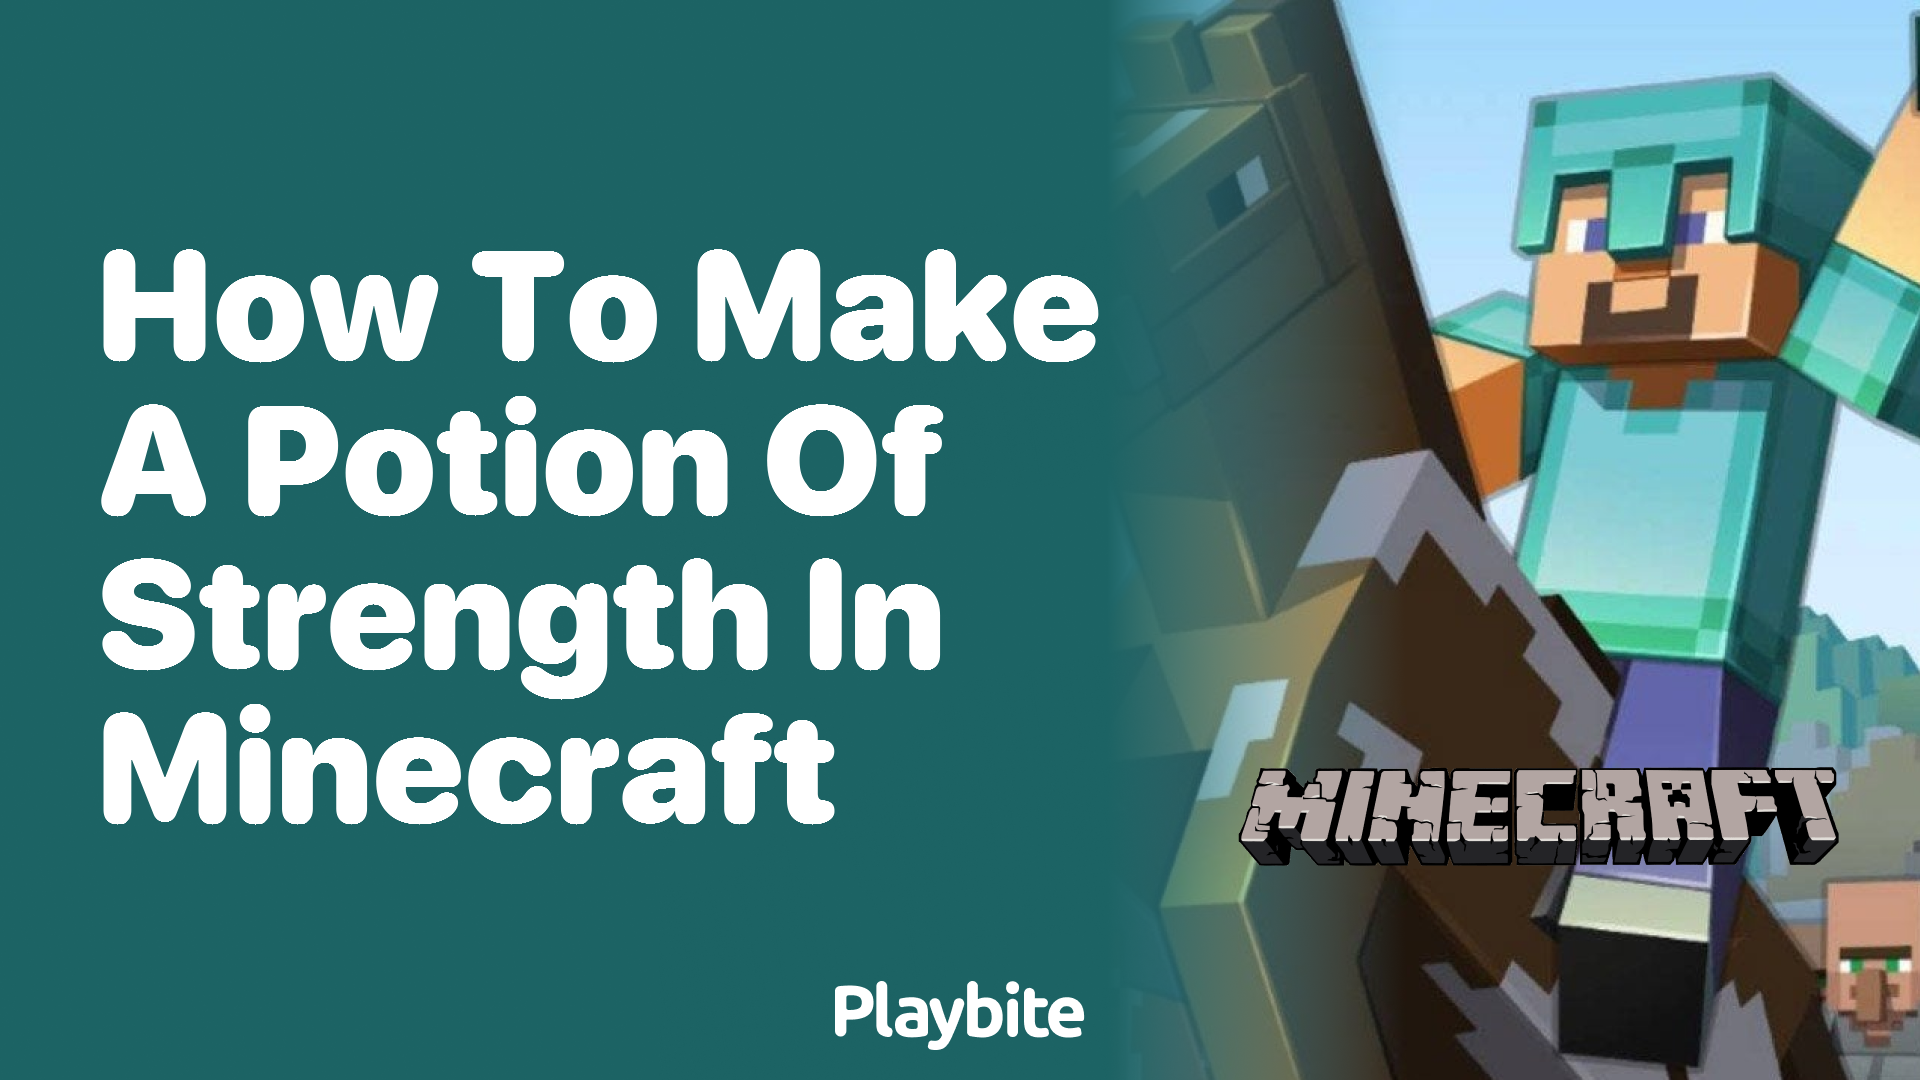 How to Make a Potion of Strength in Minecraft